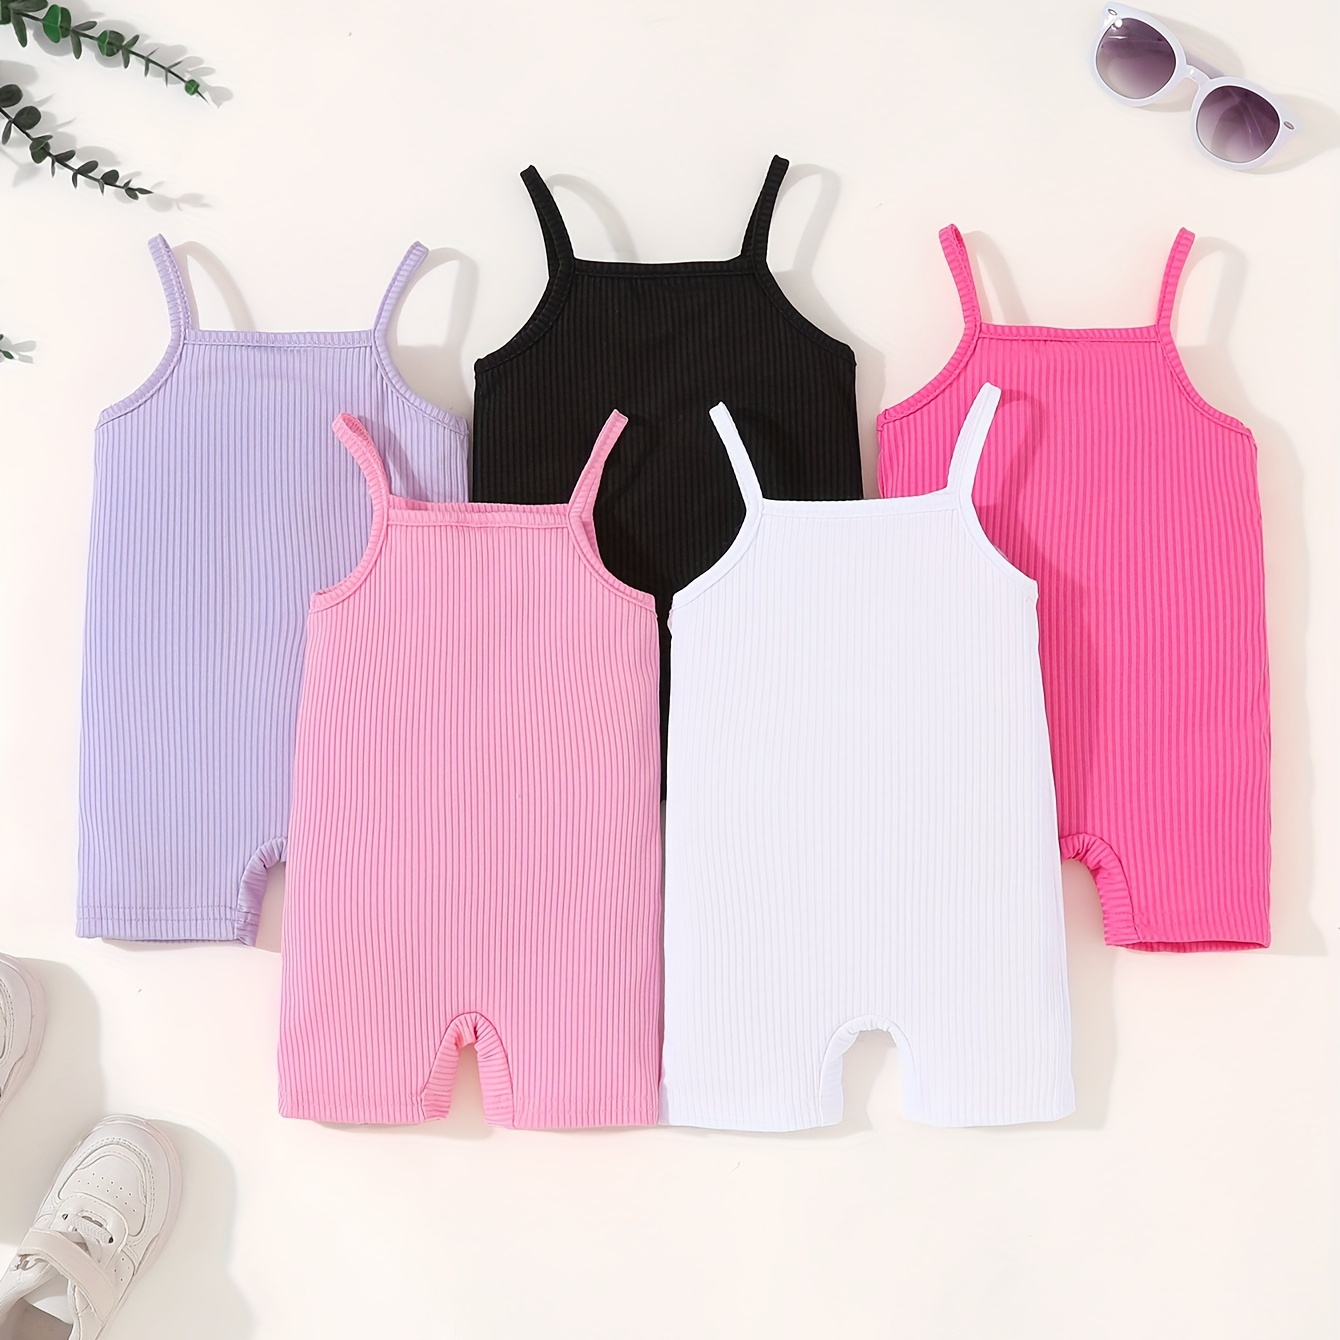 

5pcs Baby's Solid Color Ribbed Bodysuit, Casual Sleeveless Romper, Toddler & Infant Girl's Onesie For Summer, As Gift